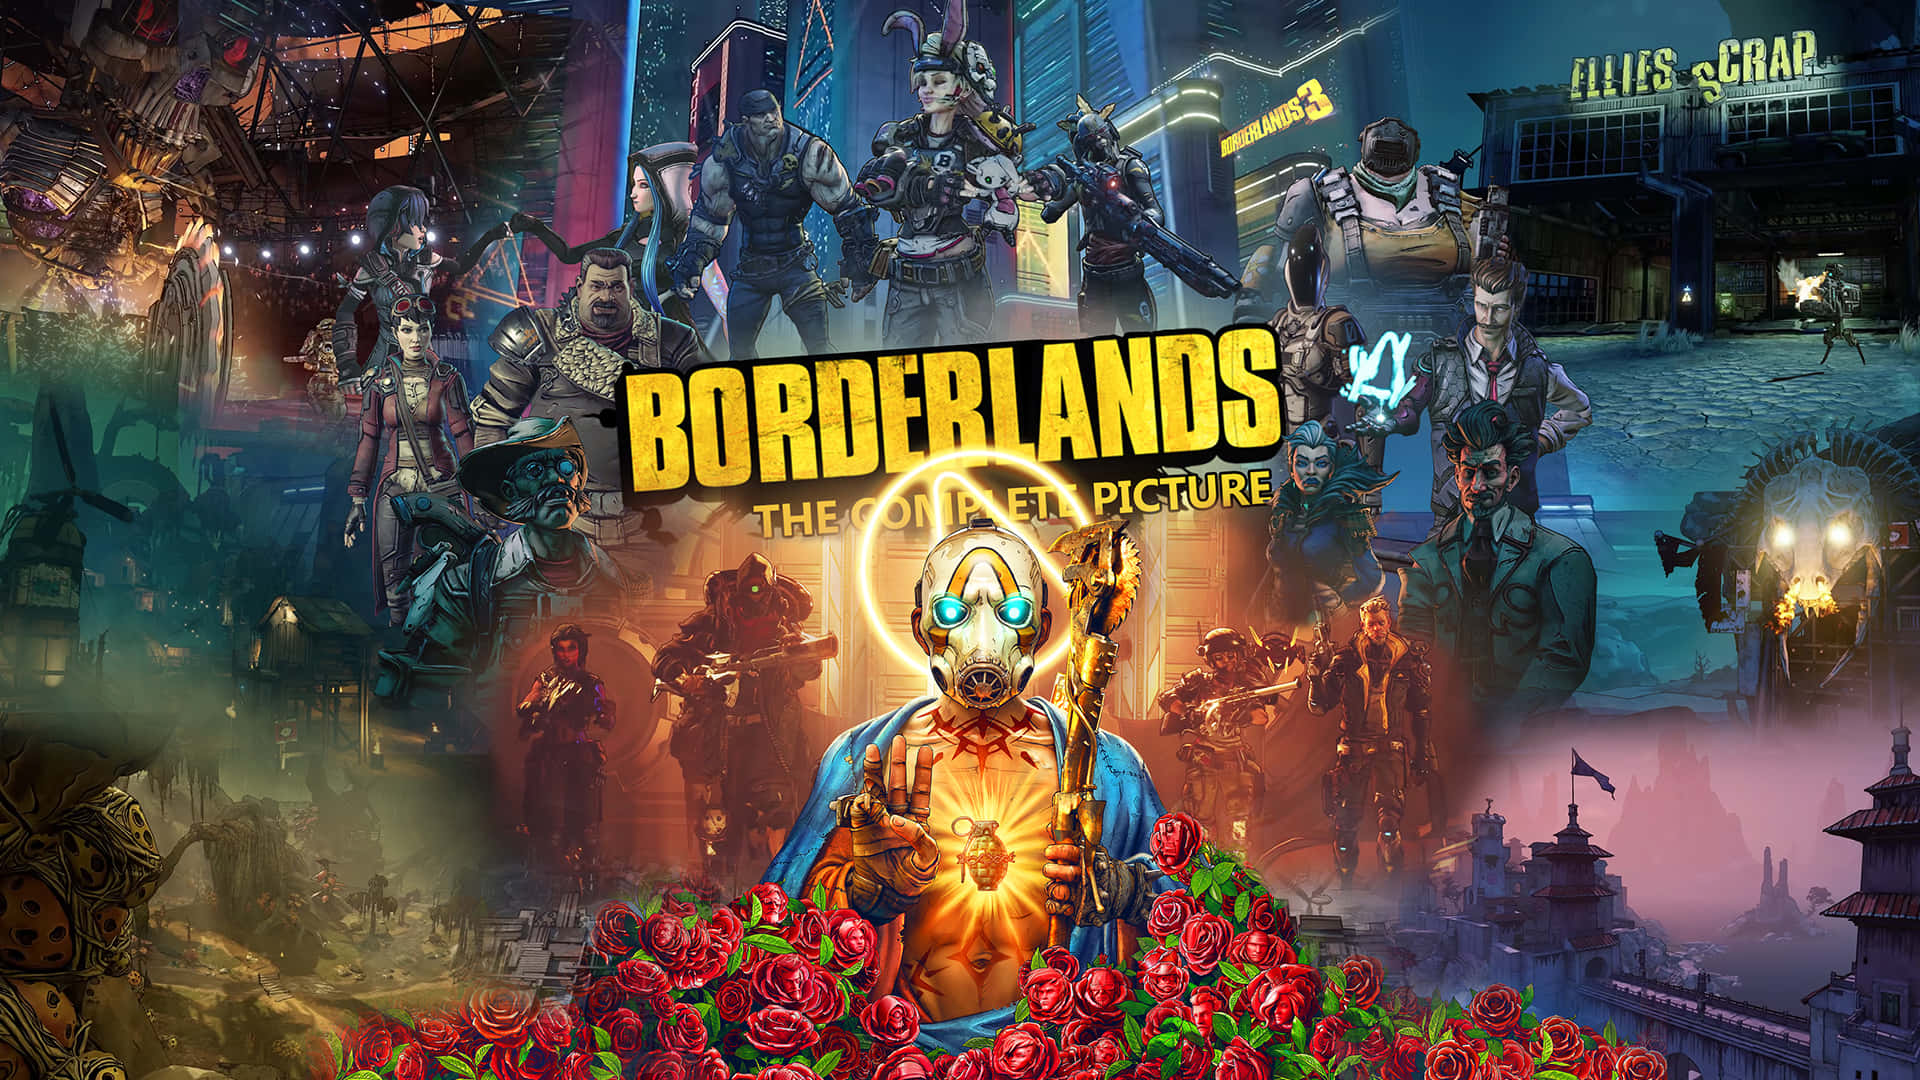 Explore the Arid and Iceen Worlds of Borderlands 3